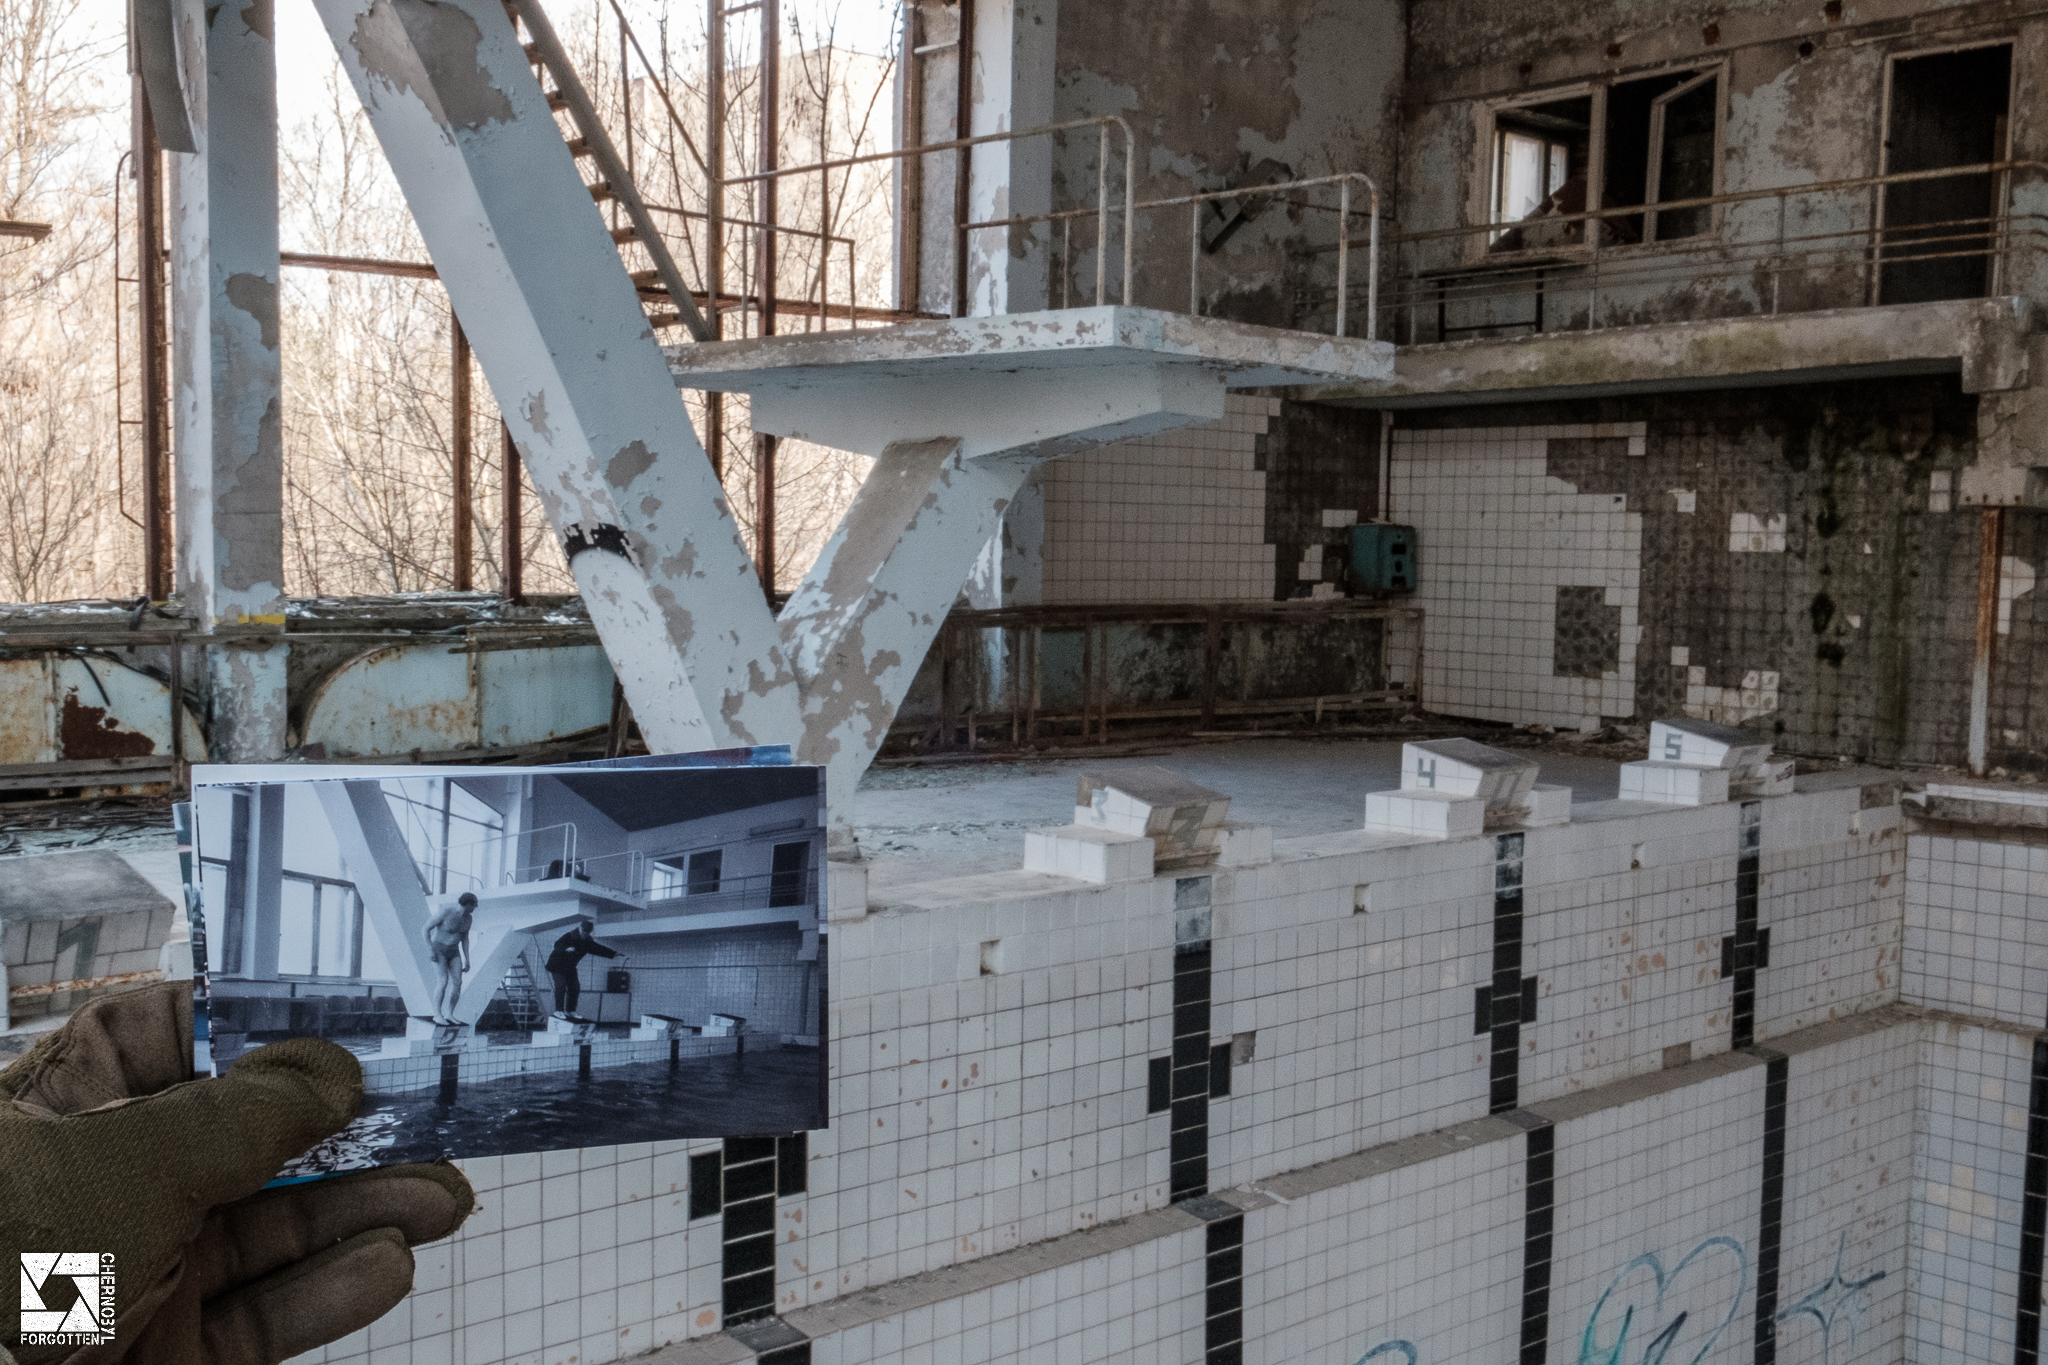 Pripyat Swimming Pool Before and After the Chernobyl Accident